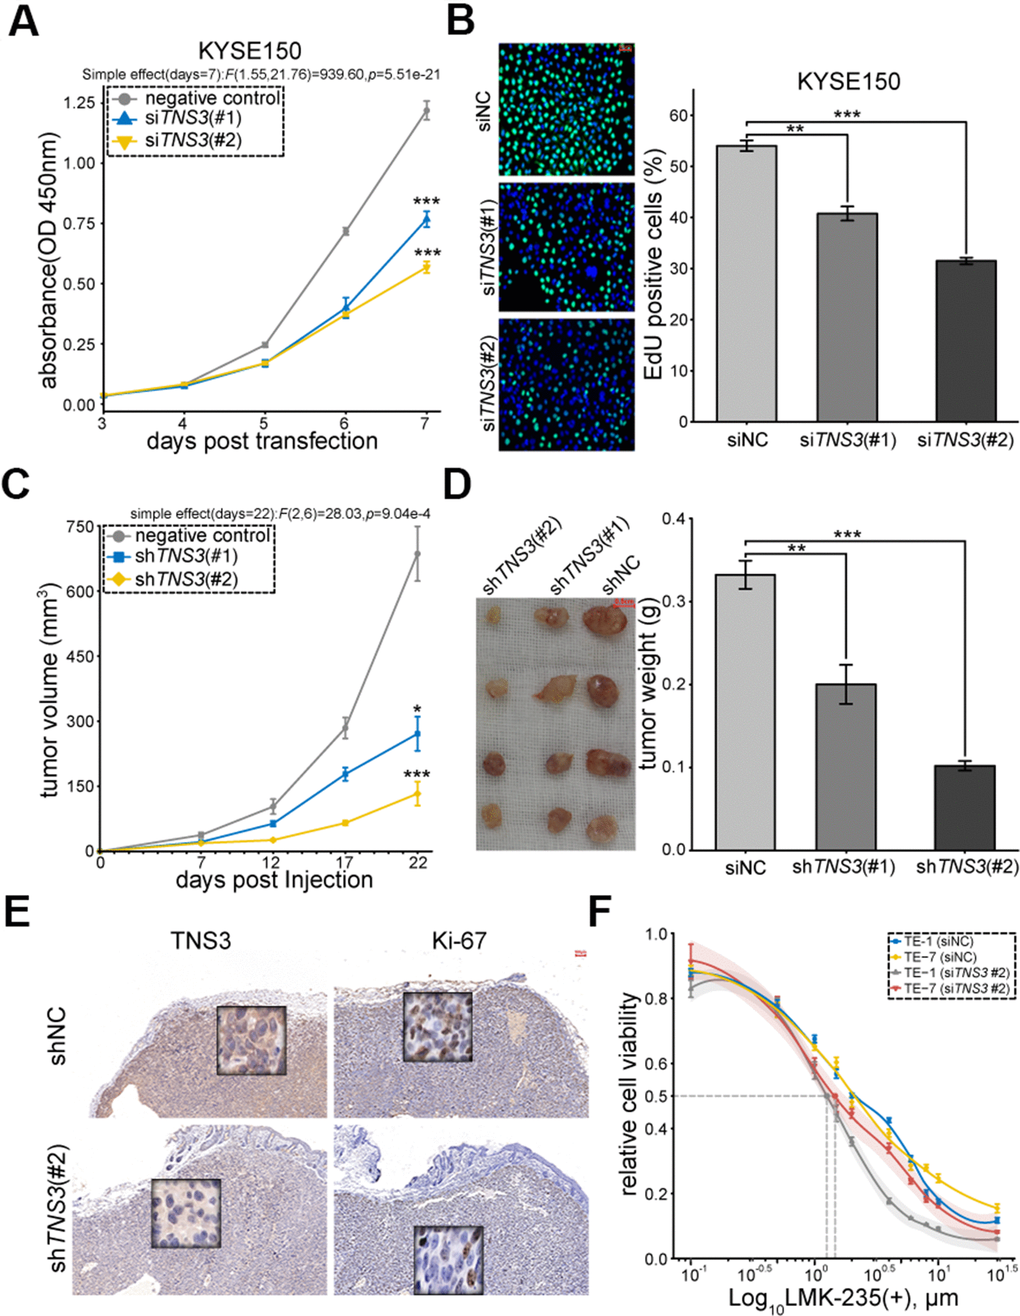 TNS3 promotes ESCC cell proliferation. (A) EdU incorporation and (B). CCK-8 assay of KYSE150 transfected with siTNS3 (#1, #2) and siNC for 48 hr. Scale bar = 50 μm. (C) Subcutaneous tumor volumes and (D). weights of the xenograft mice model (expressed shTNS3#1, #2, shNC). Scale bar = 0.5 cm. (E) Immunostaining of TNS3 and Ki-67 in the subcutaneous tumor blocks (shTNS3 #2 and shNC). Scale bar = 100 μm. (F) Growth curves of TE-1 and TE-7 treated with LMK-235 for 48 hr post-transfection with siTNS3(#2). Absorbance at OD450 nm are normalized to vehicle control (0.1% DMSO; n = 5 wells/dose point). IC50 of cells transfected with siTNS3(#2) are marked as grey (TE-1) and red (TE-7) point, respectively. (A–D, F) Error bar denotes SEM of three replicates.